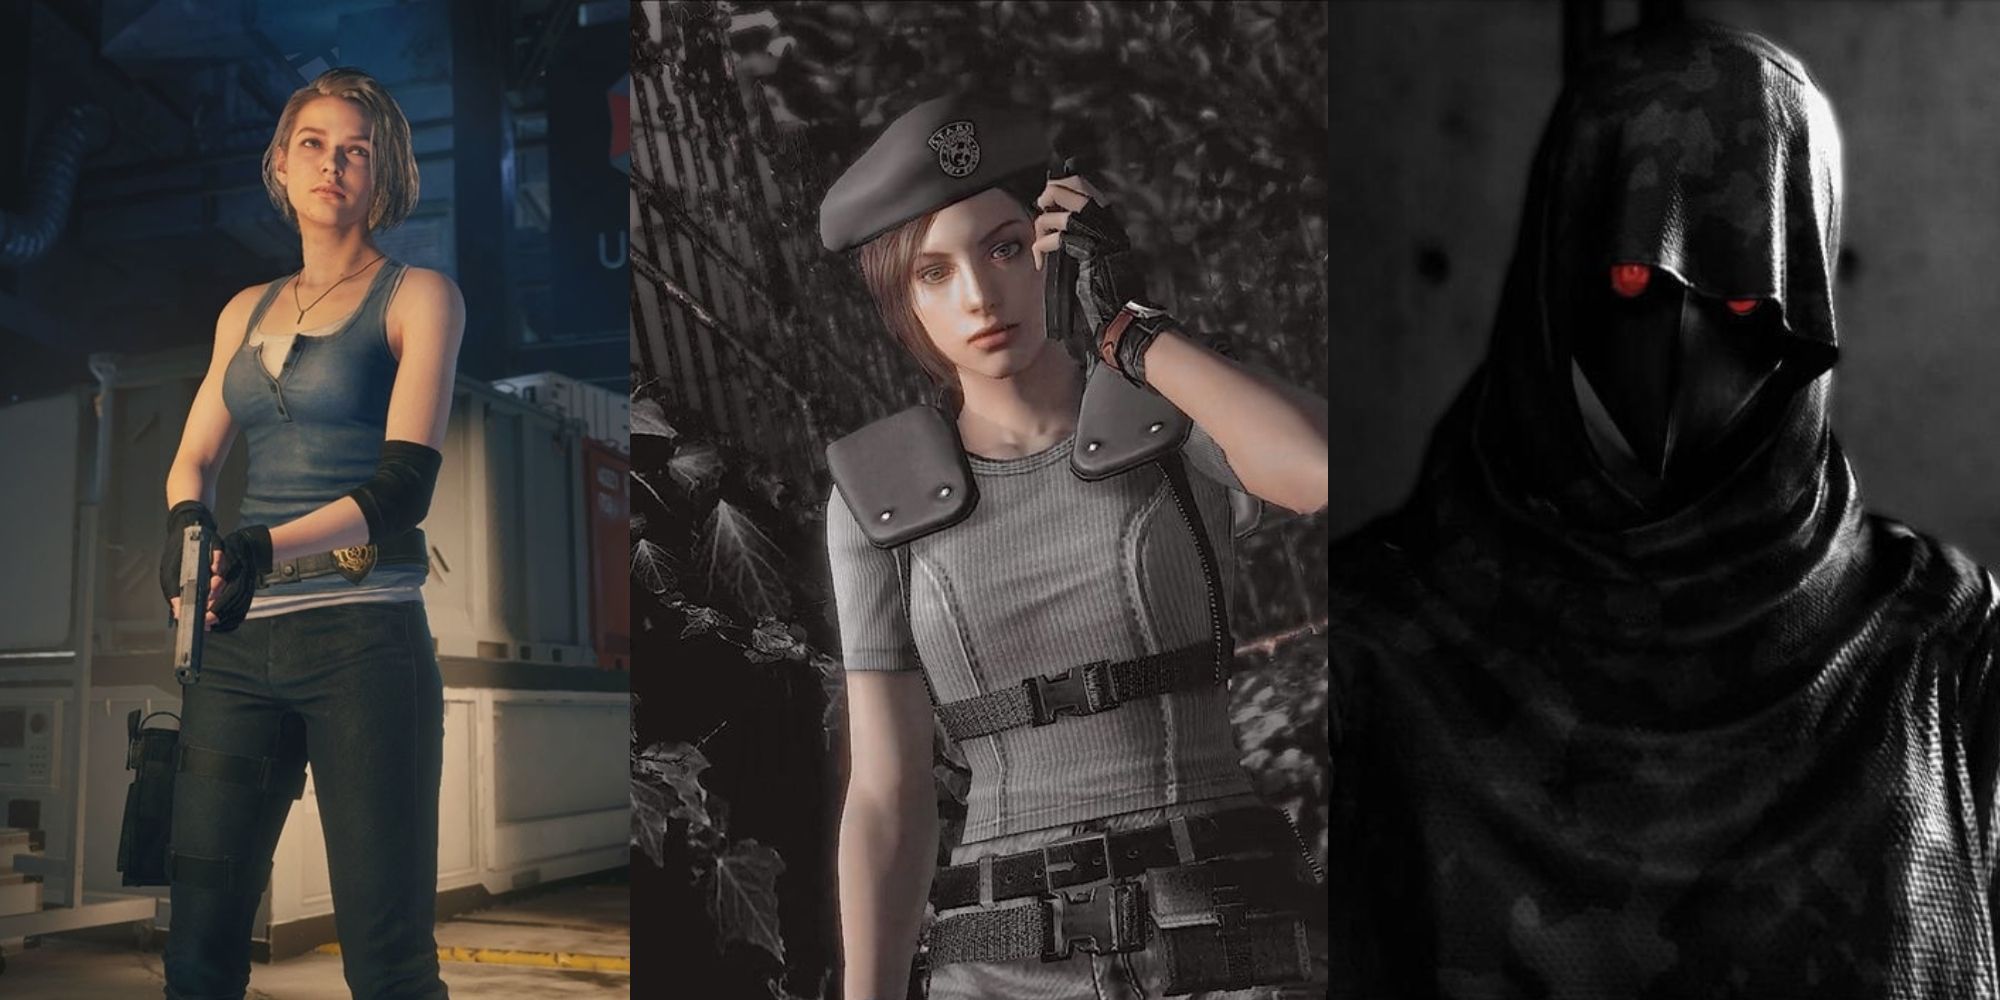 Examples of three different Jill looks from across the franchise.